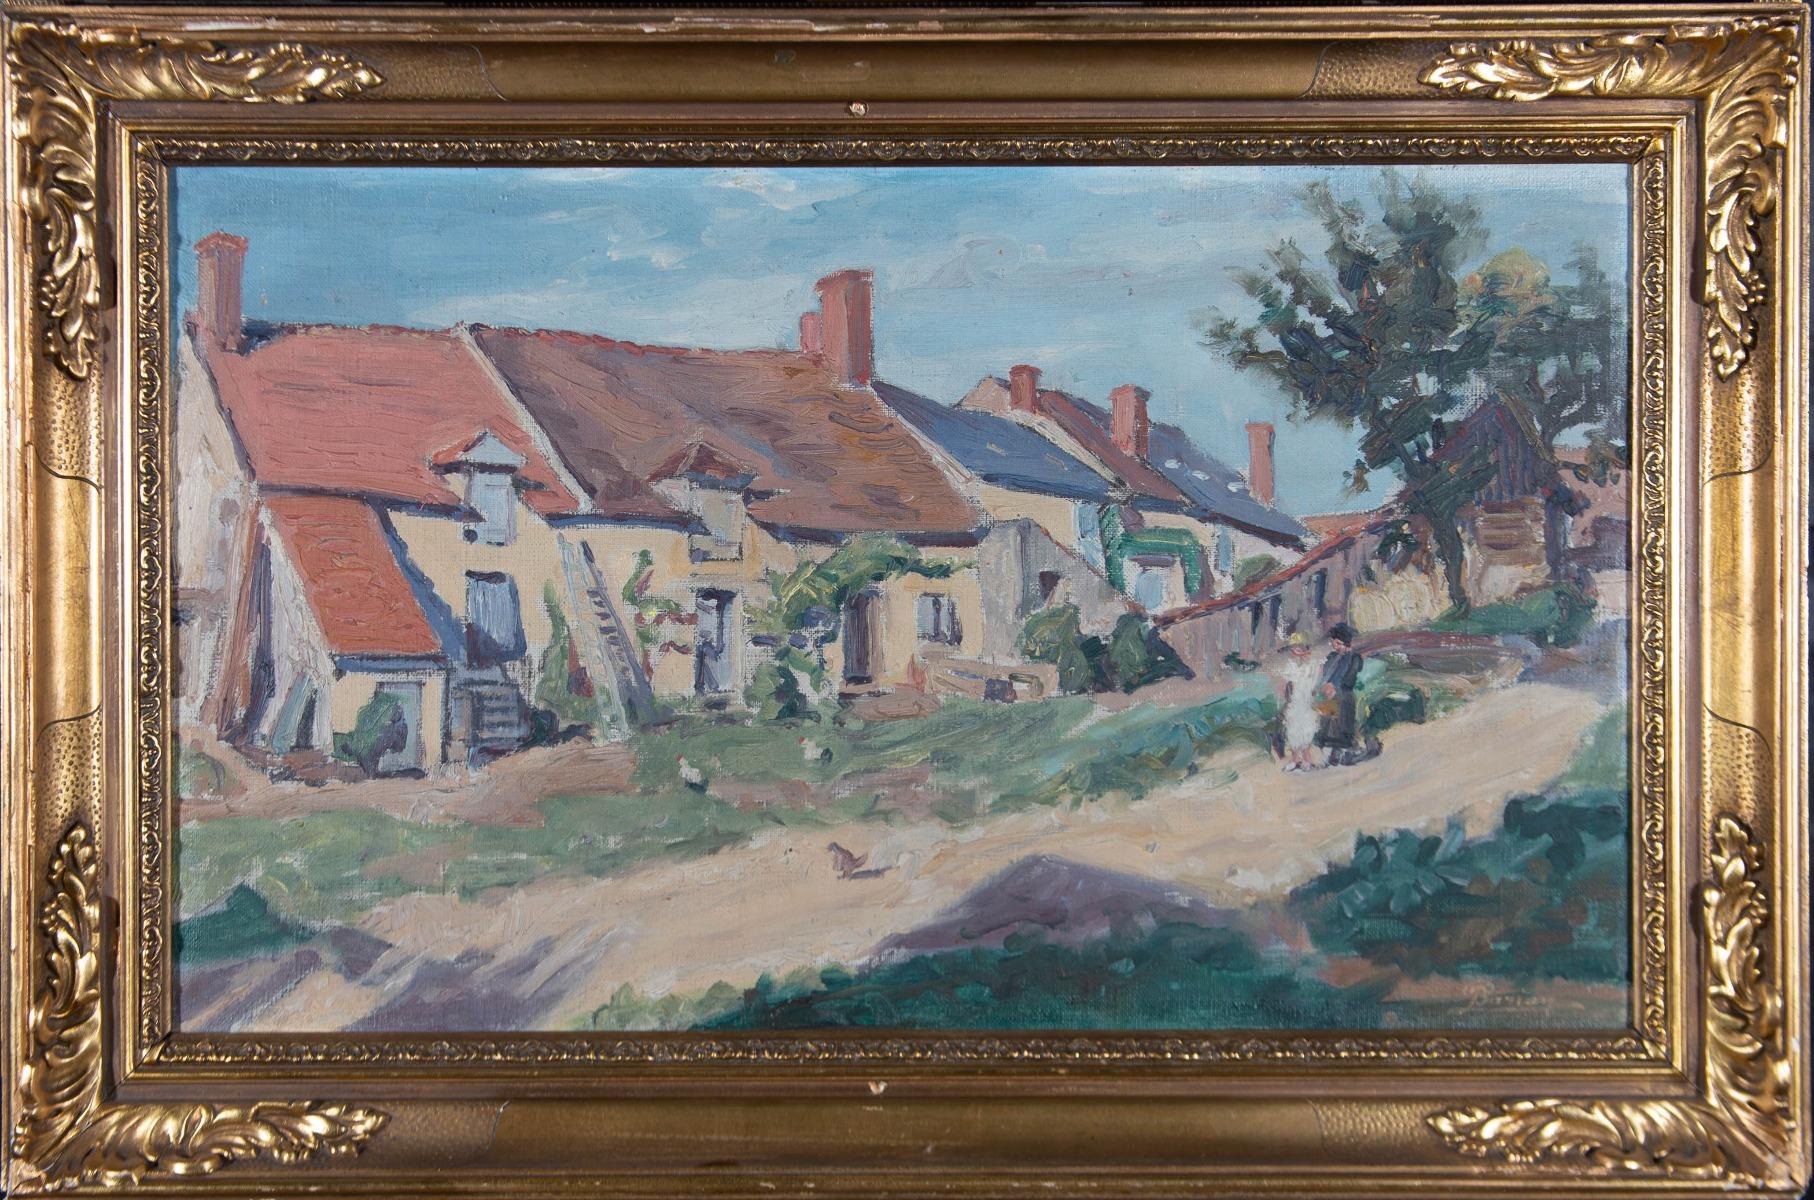 A charming and expressive early 20th Century oil painting by the artist Paul Joseph Barian, depicting a rural countryside cottage study. The delicate brushstrokes and fine attention to detail, delicately portrays this rural countryside scene. The